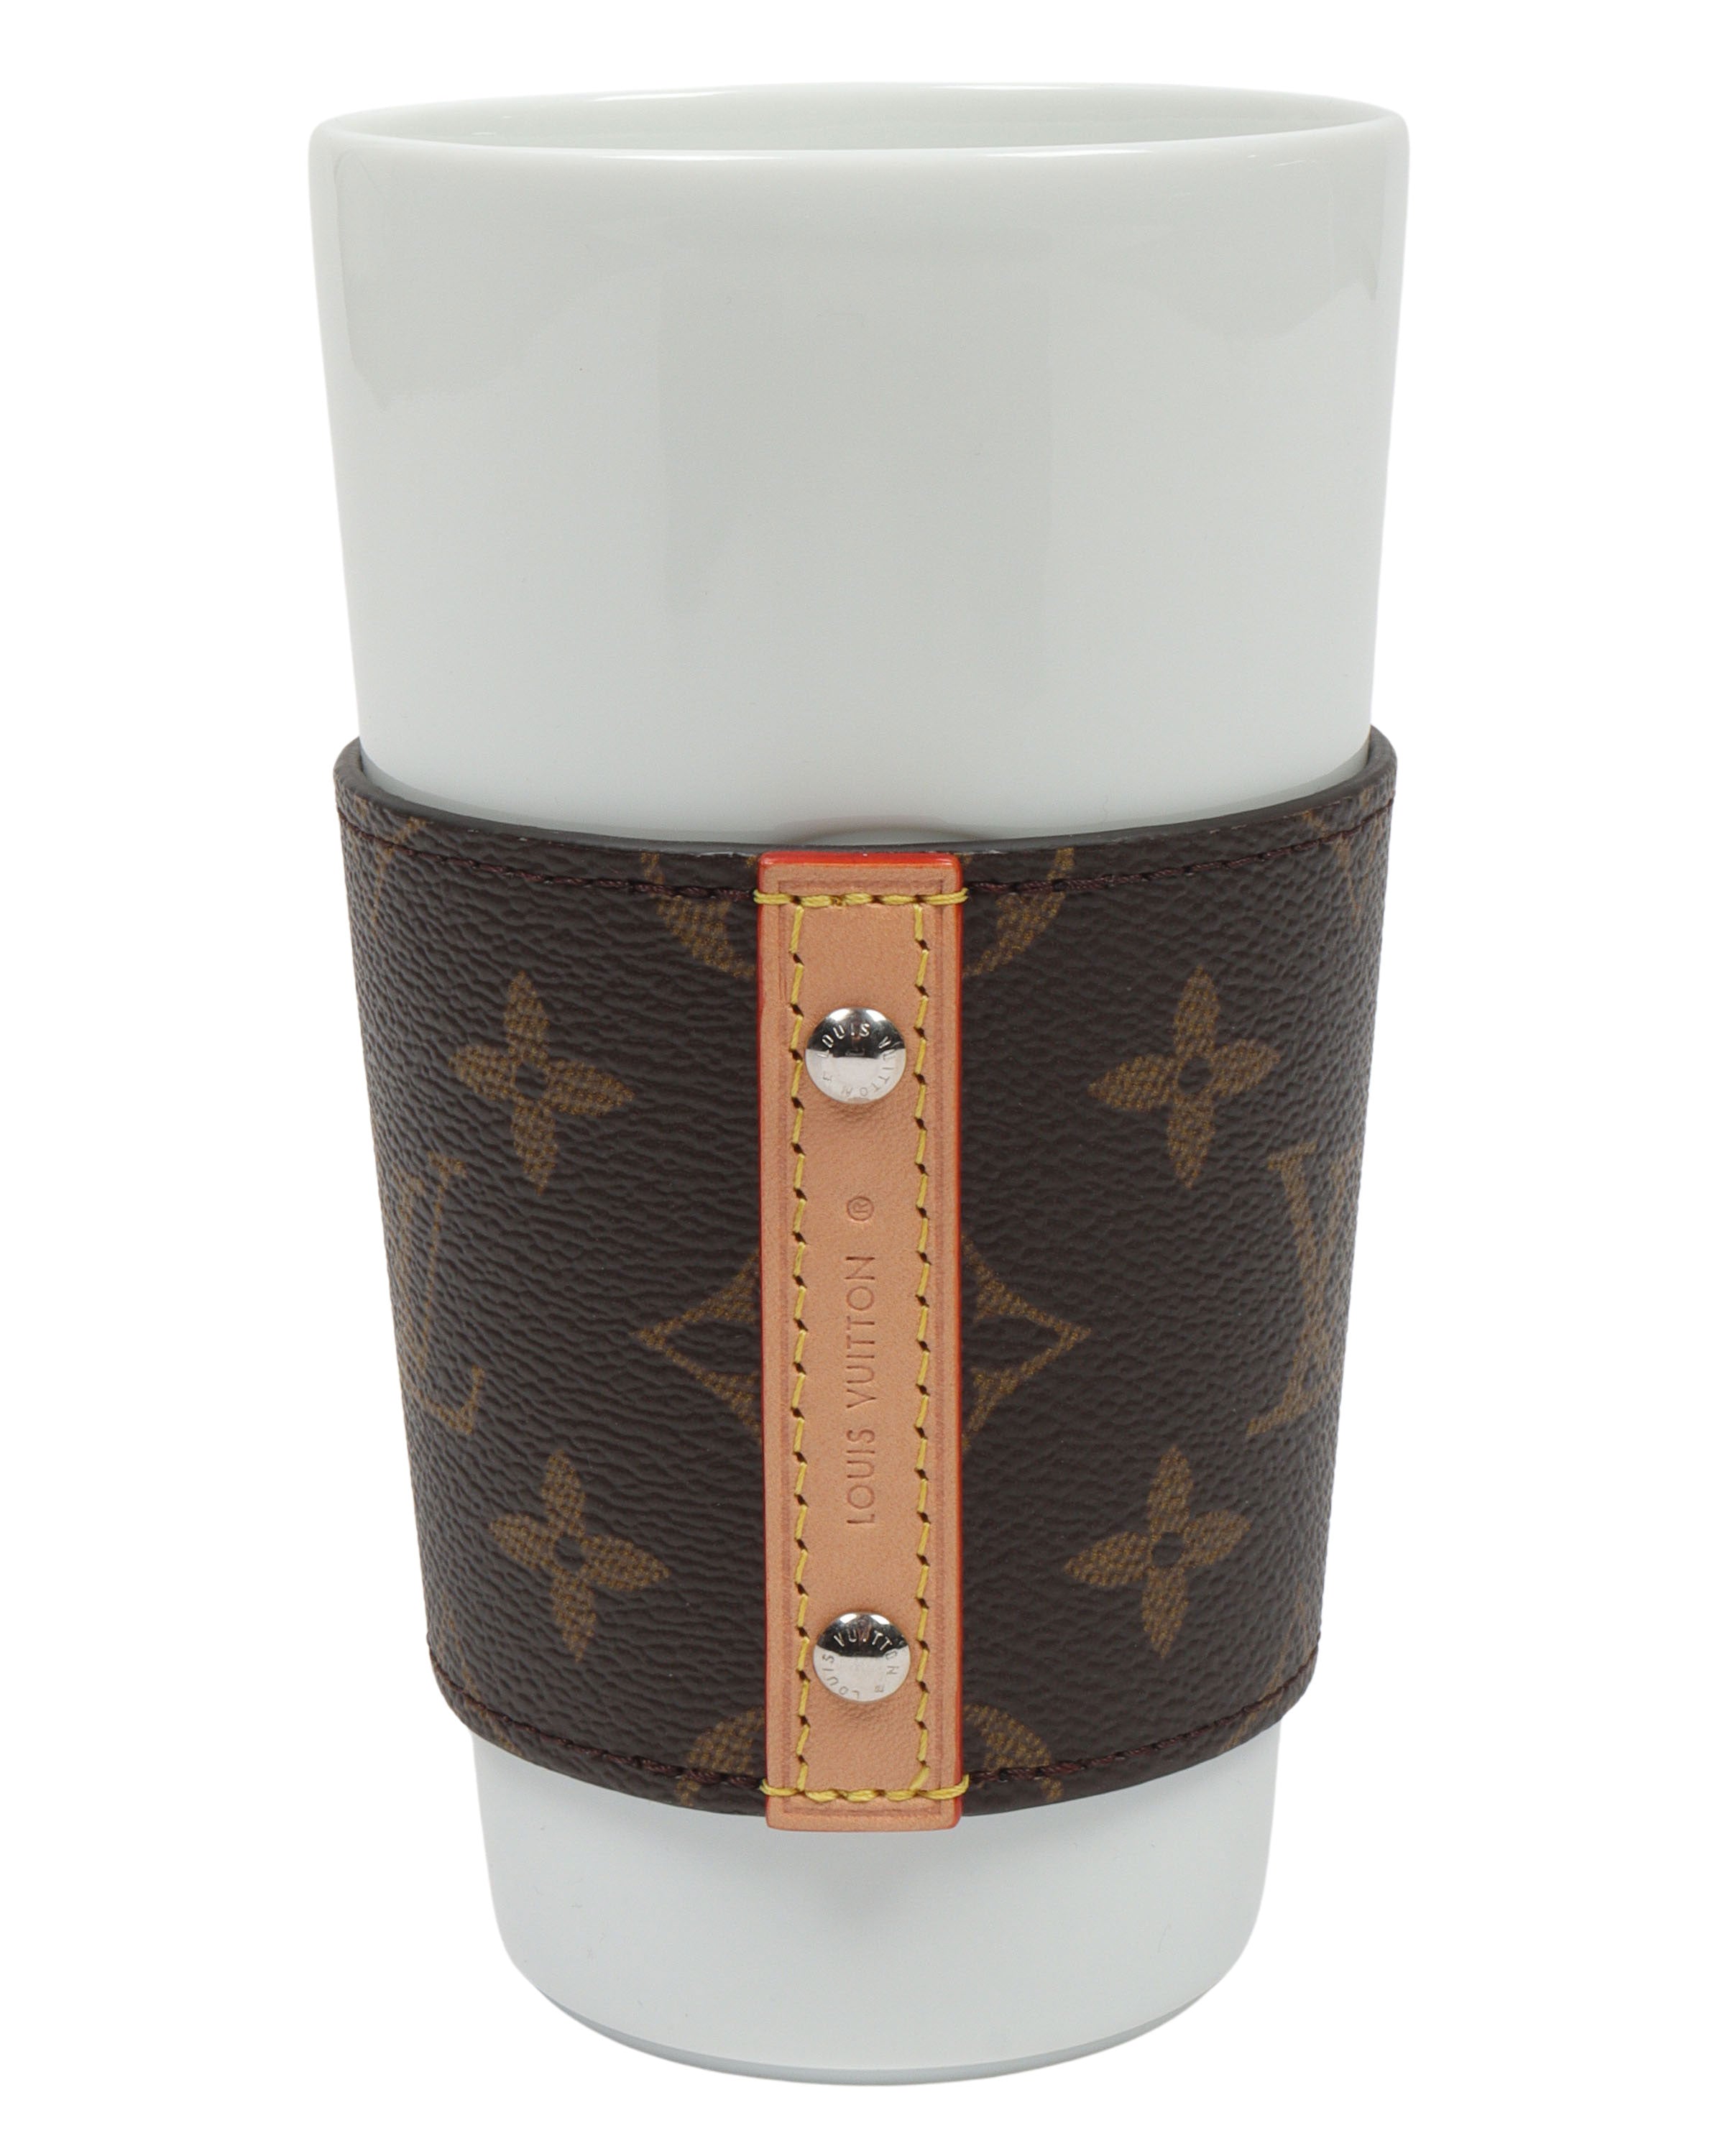 ViaAnabel - #LouisVuitton Coffee Cup 😍 Need this in my life